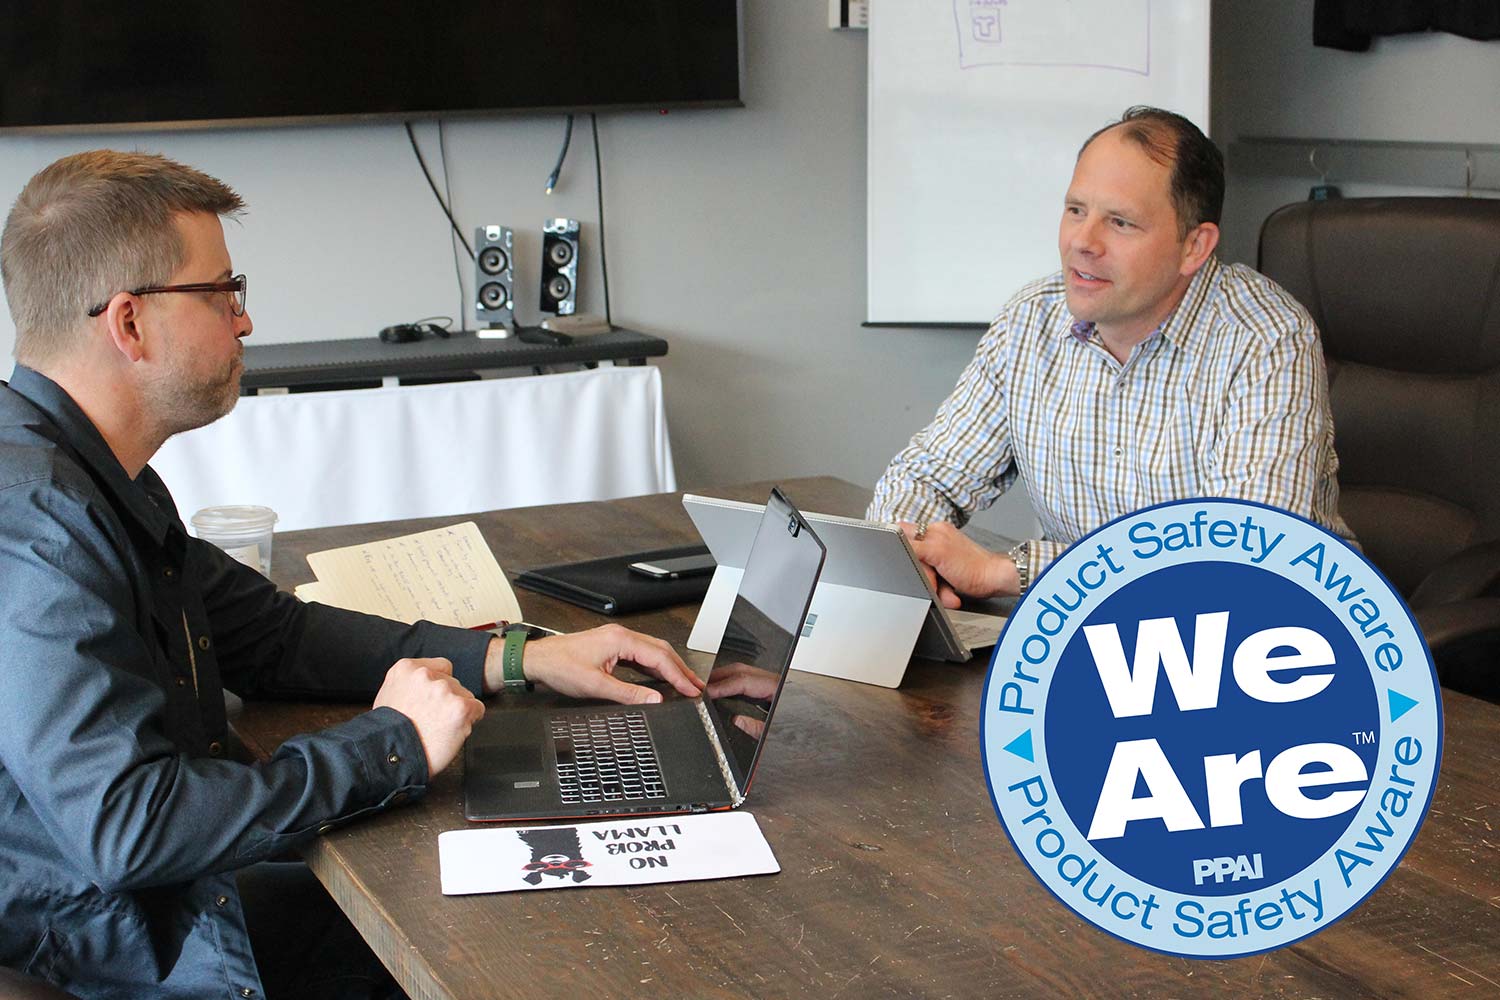 Image to two people meeting in a conference room with PPAI Product Safety Aware logo superimposed on image.